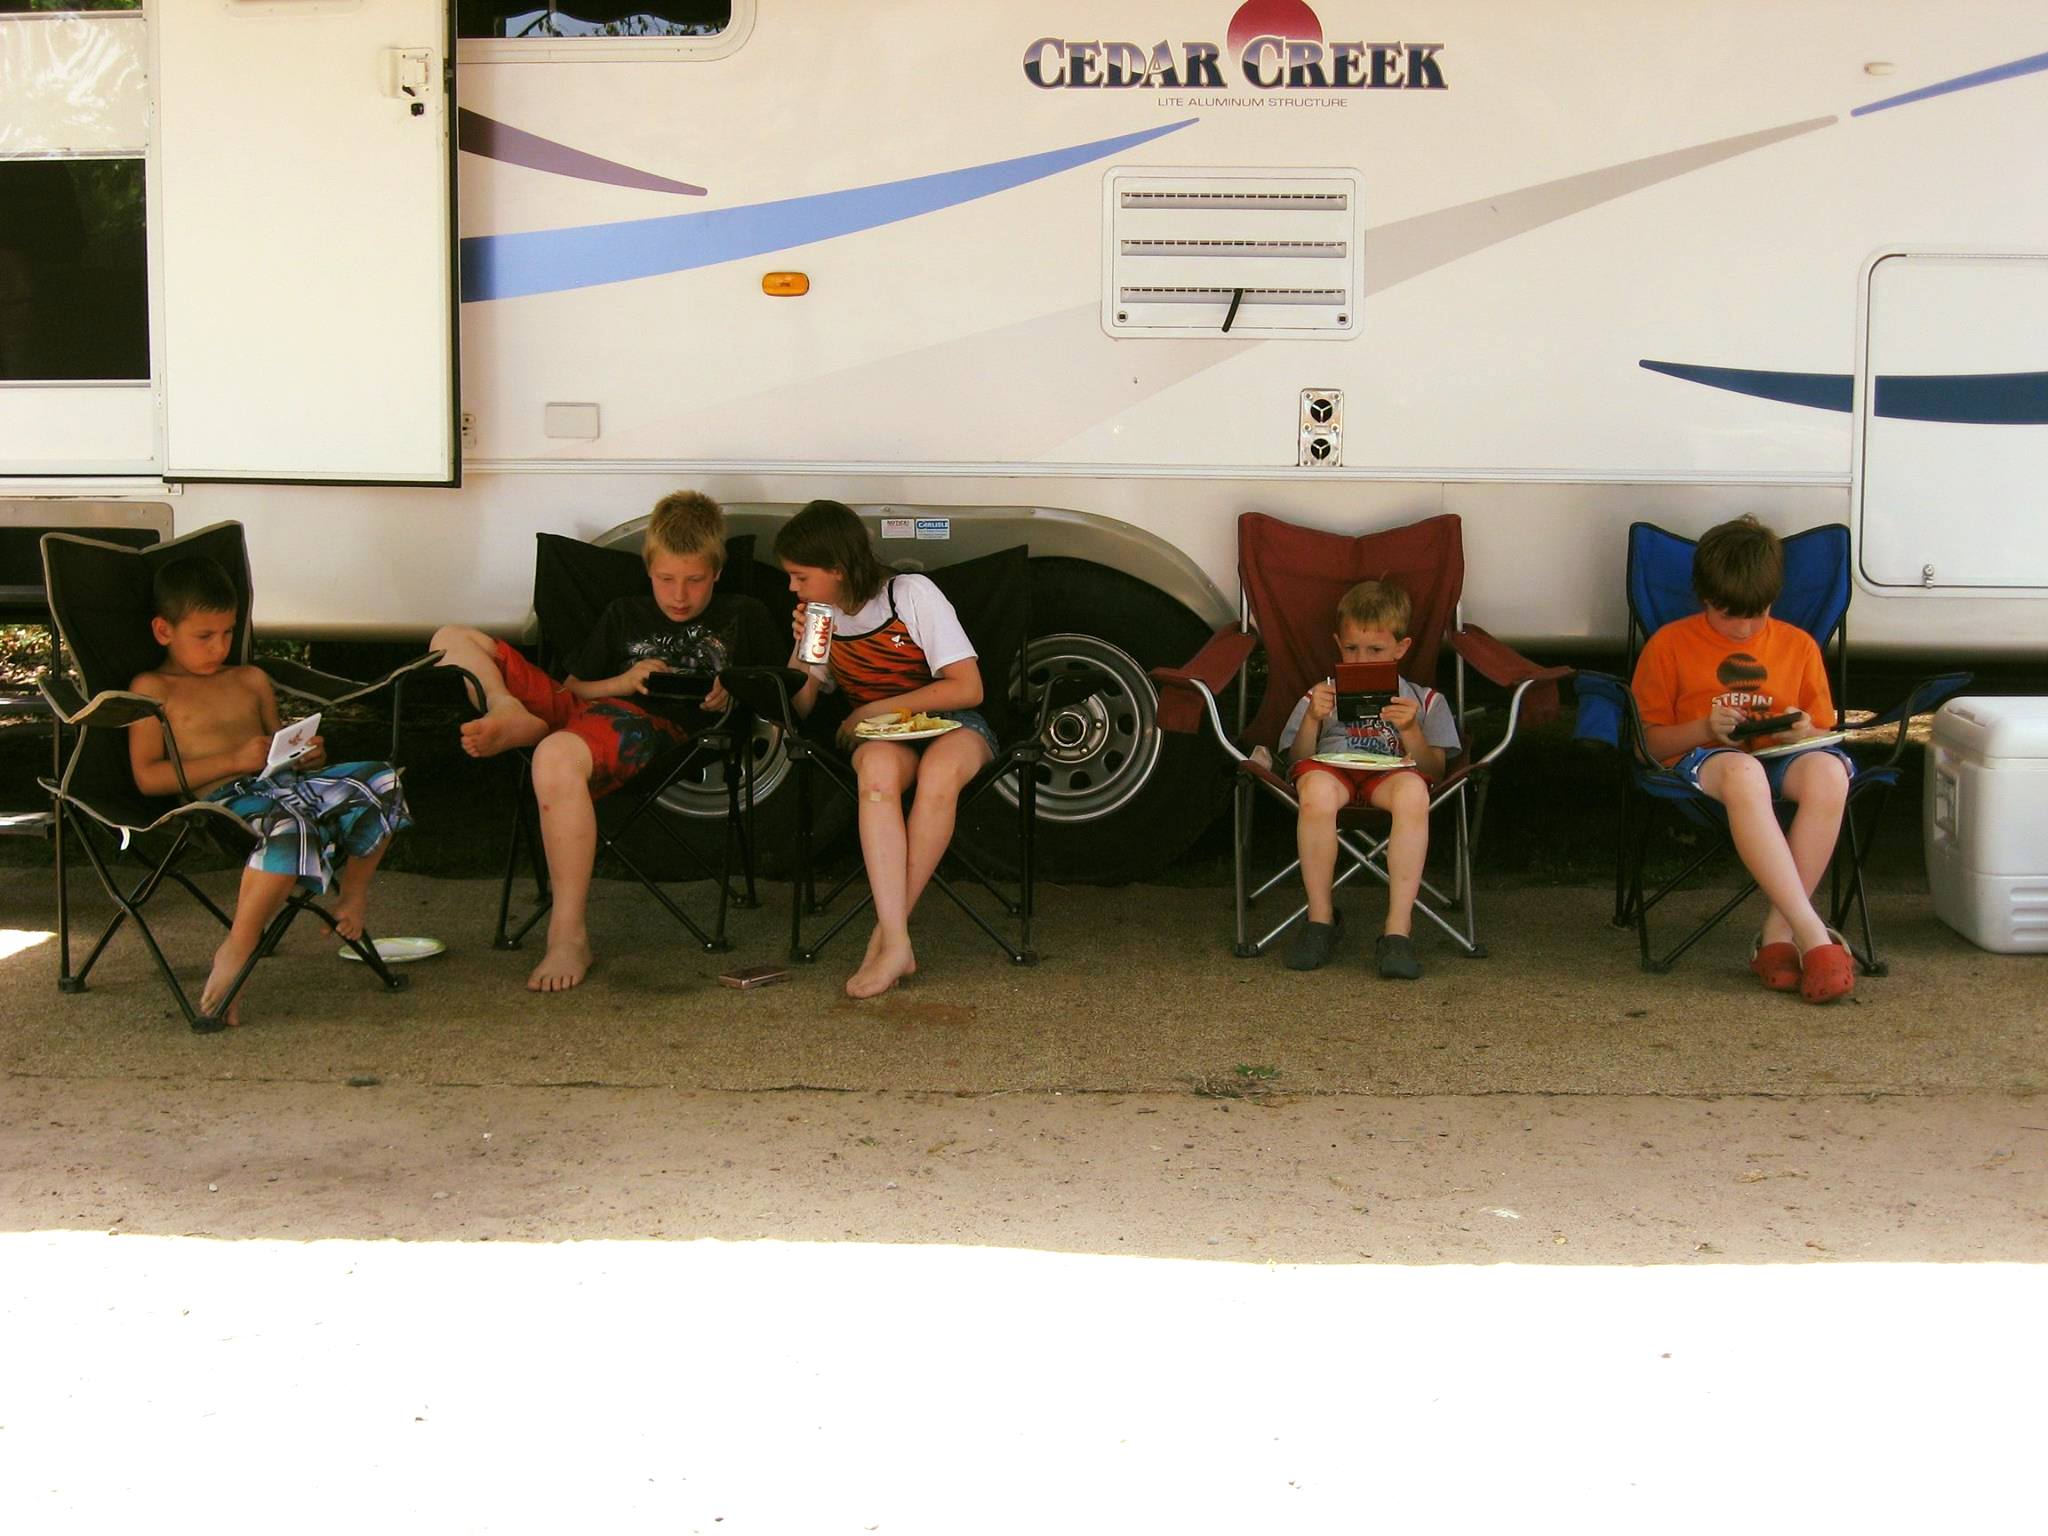 Camping at Lake Chippewa the summer of 2010. Swimming, fishing, tubing, and the kids playing their Nintendos under the awning of our big old camper. What a great memory!